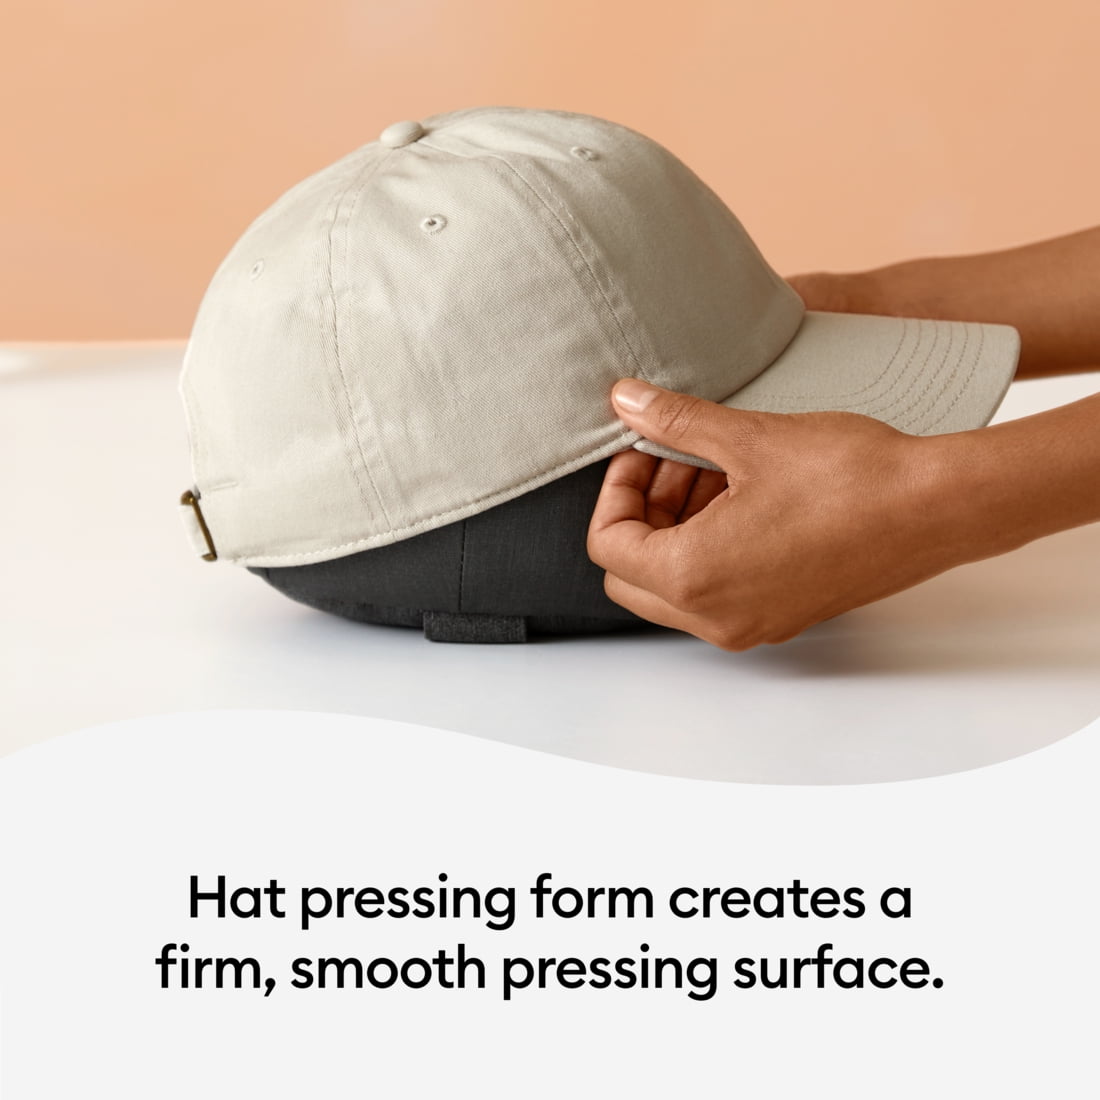 Cricut Hat Press Review: Curves Don't Fight Back Anymore - CNET